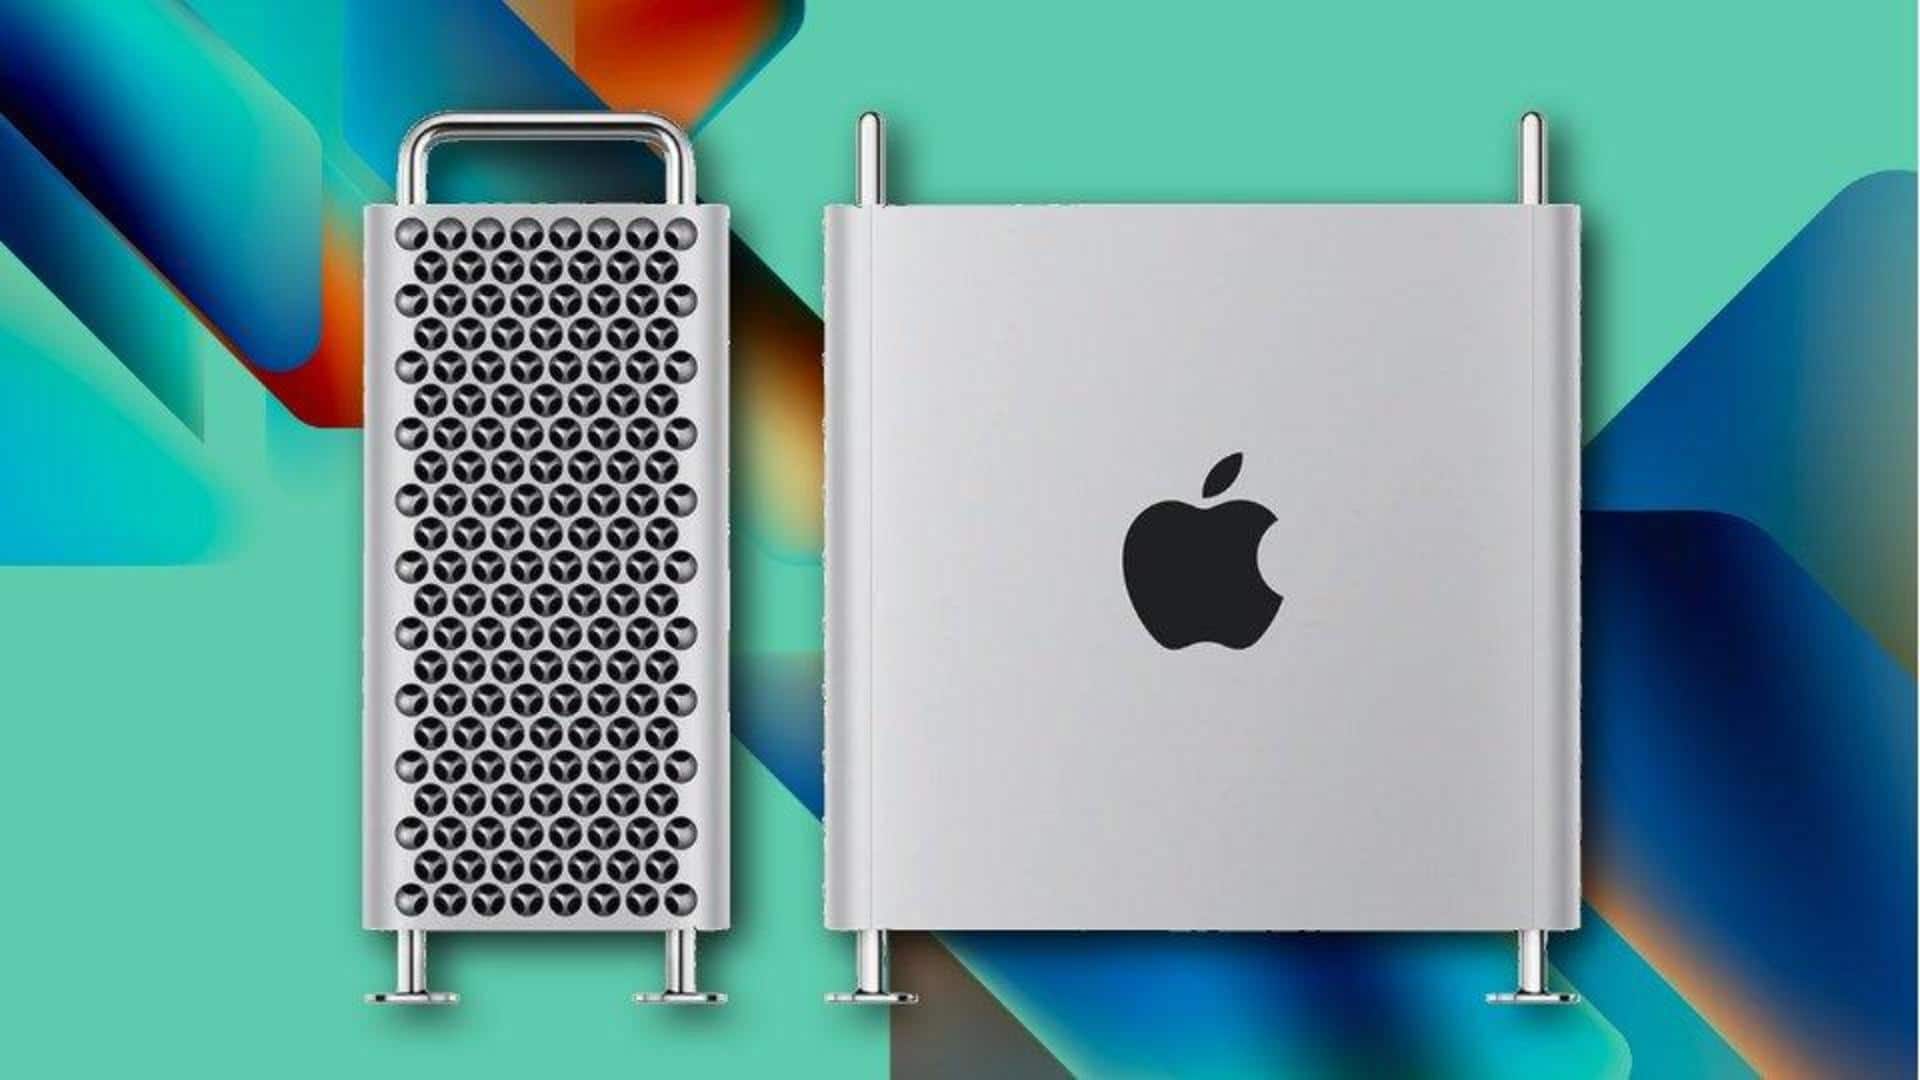 Apple Mac Pro gets even more powerful with M2 Ultra